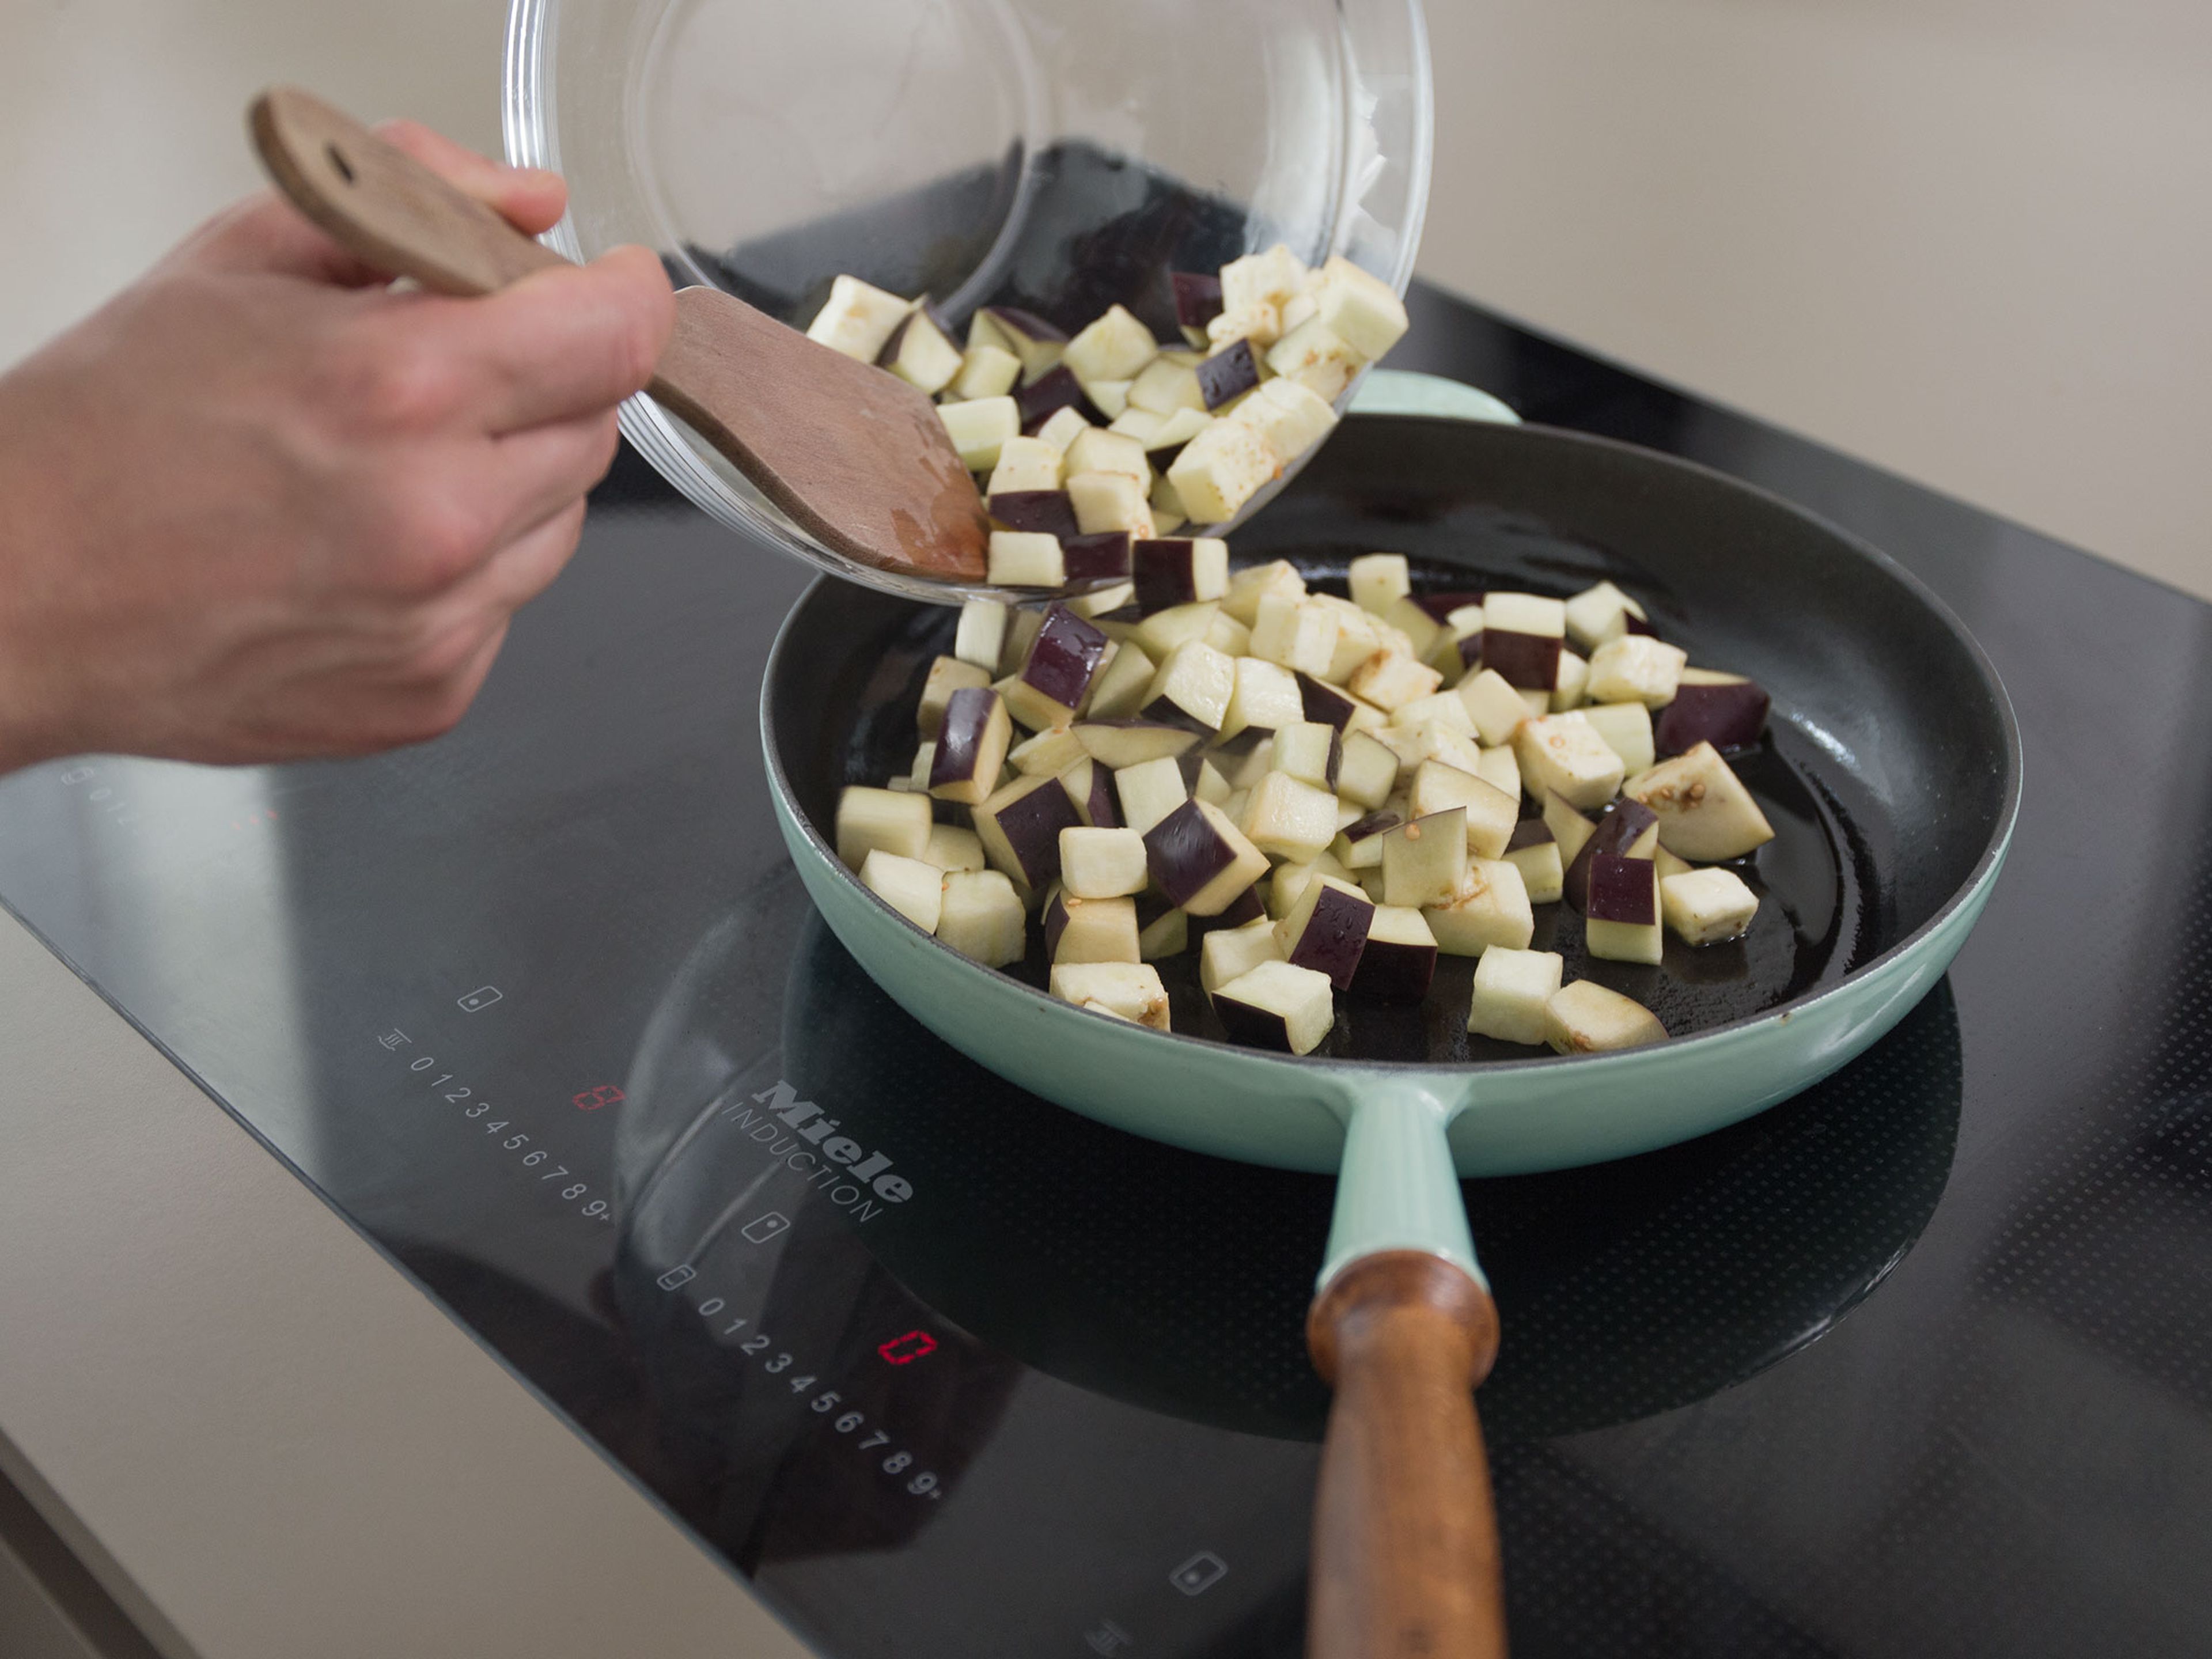 Rinse eggplant and pat dry to get rid of any excess water. Heat up the remaining olive oil in a large pan and fry the eggplant for approx. 3 - 4 min. over high heat.